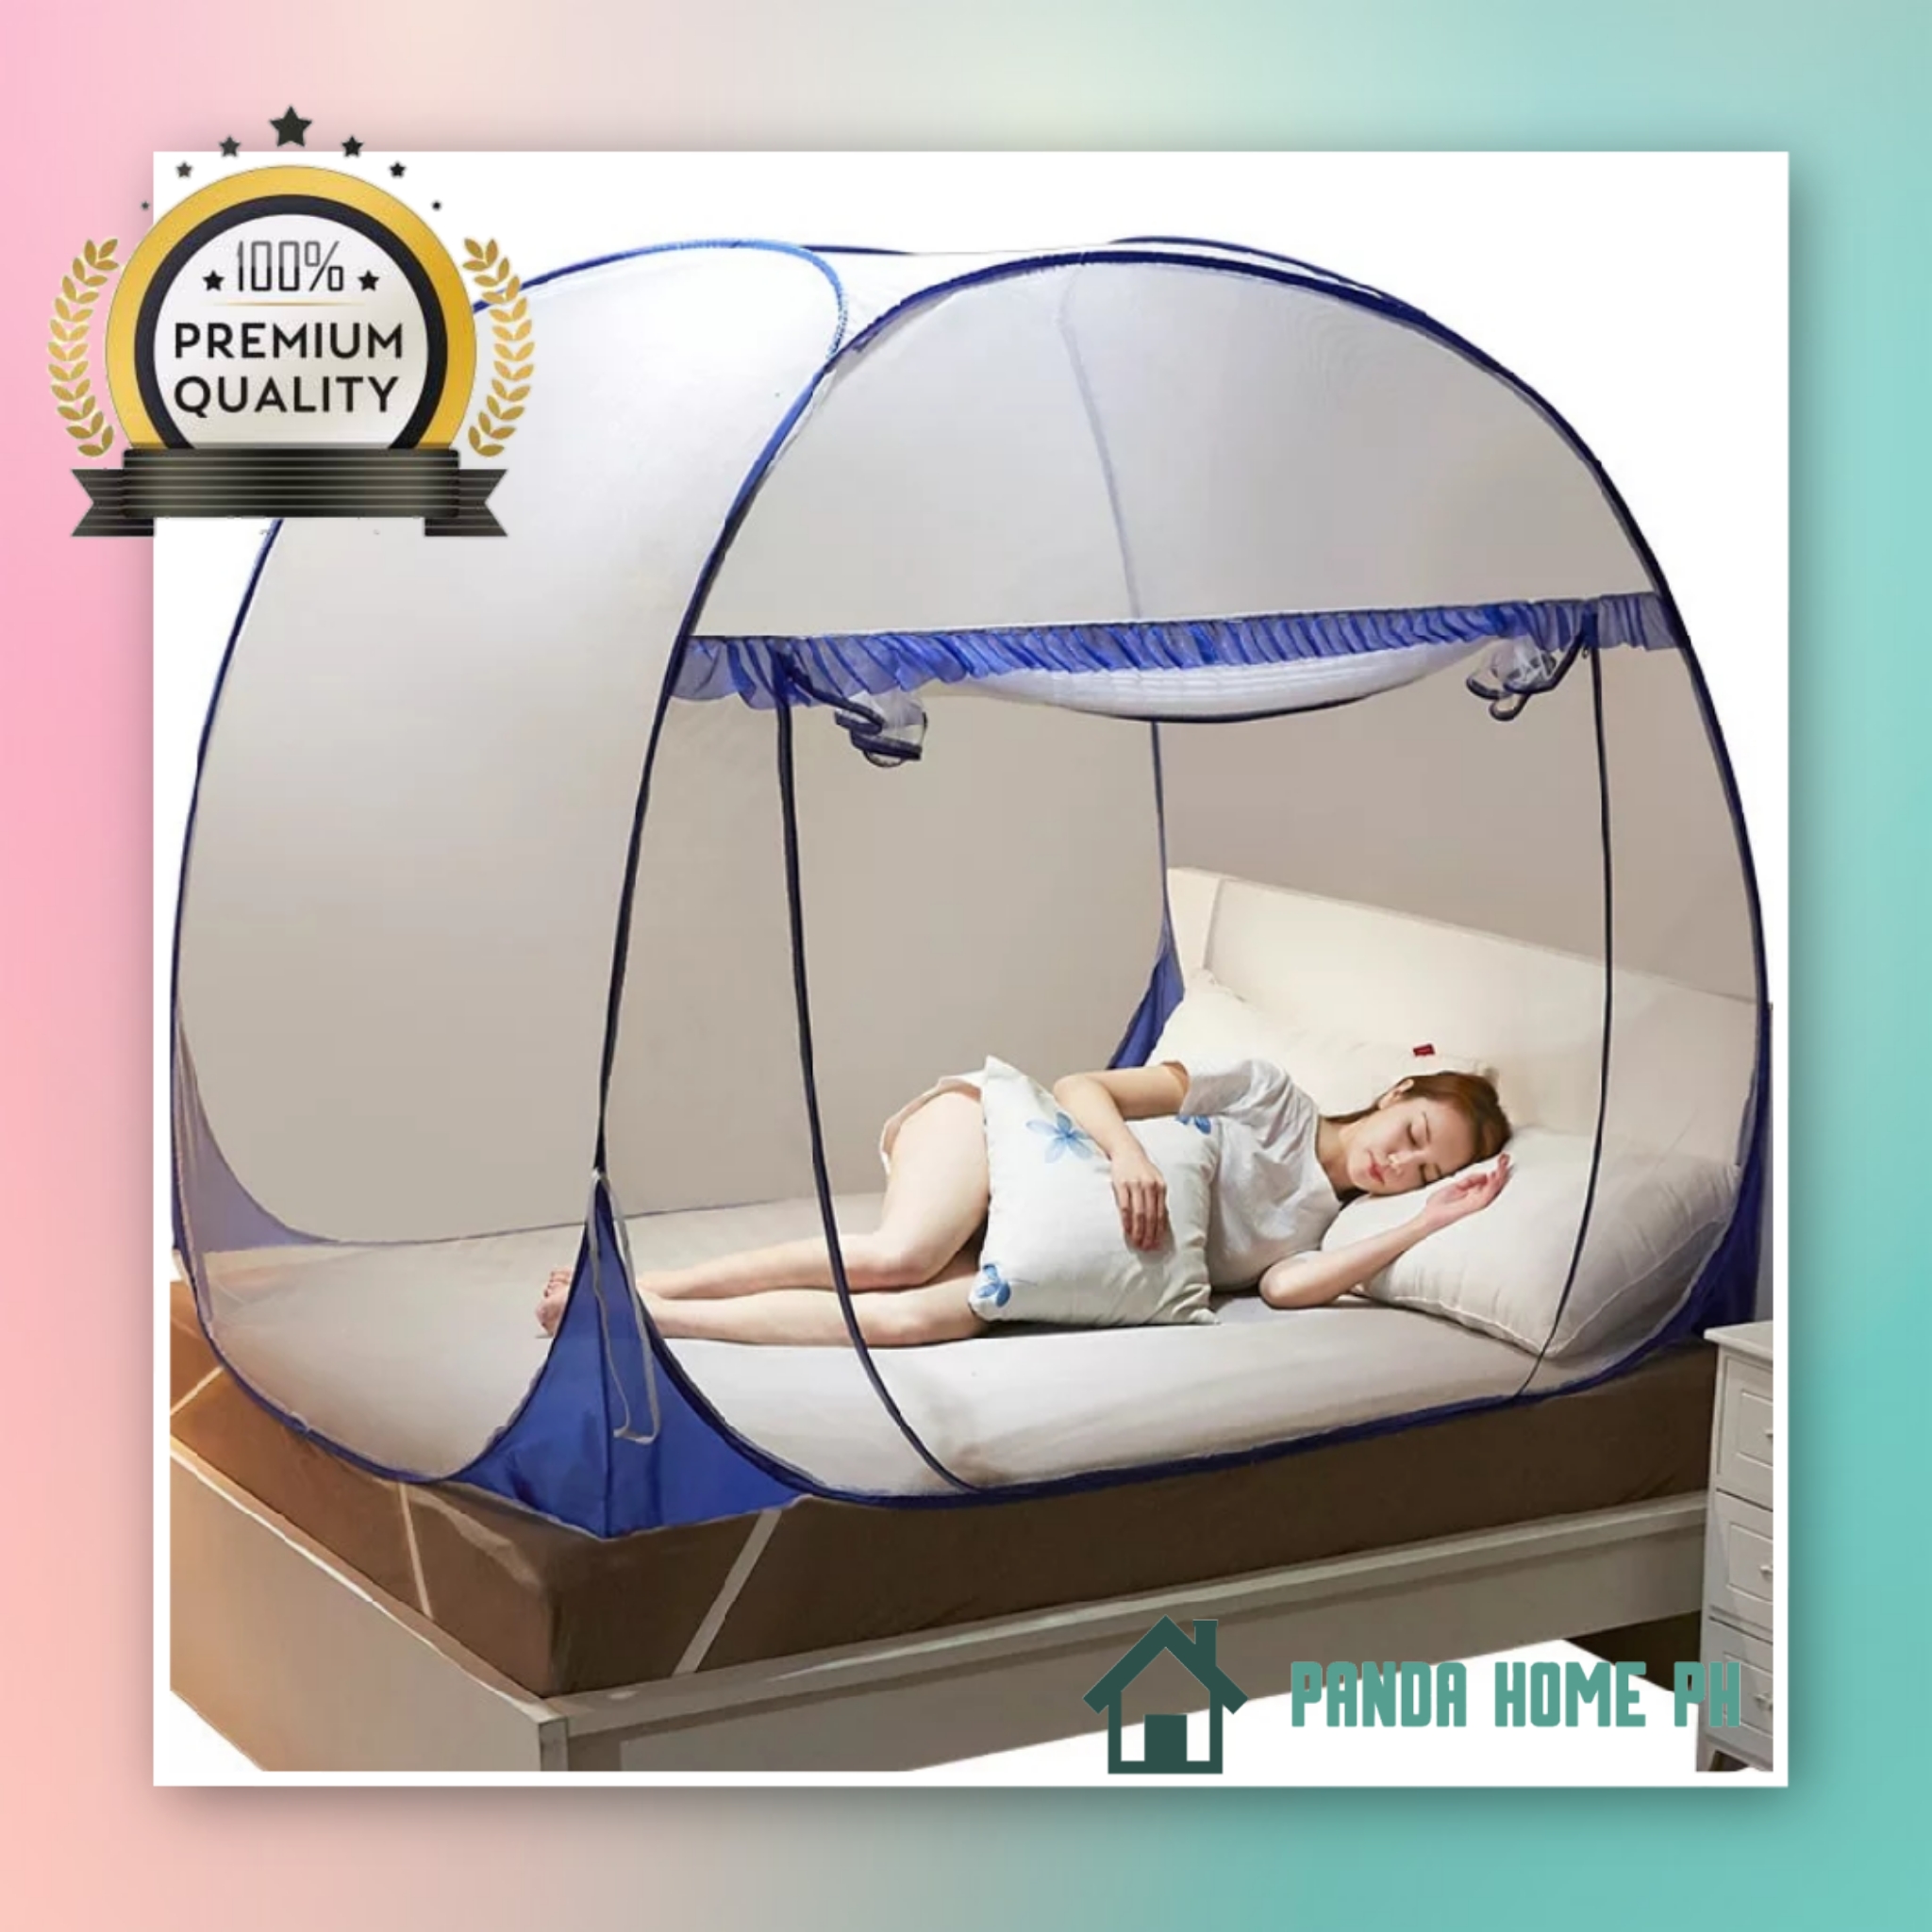 King Size 1 8m Foldable Pop Up Mosquito, Pop Up Mosquito Net For King Size Bed